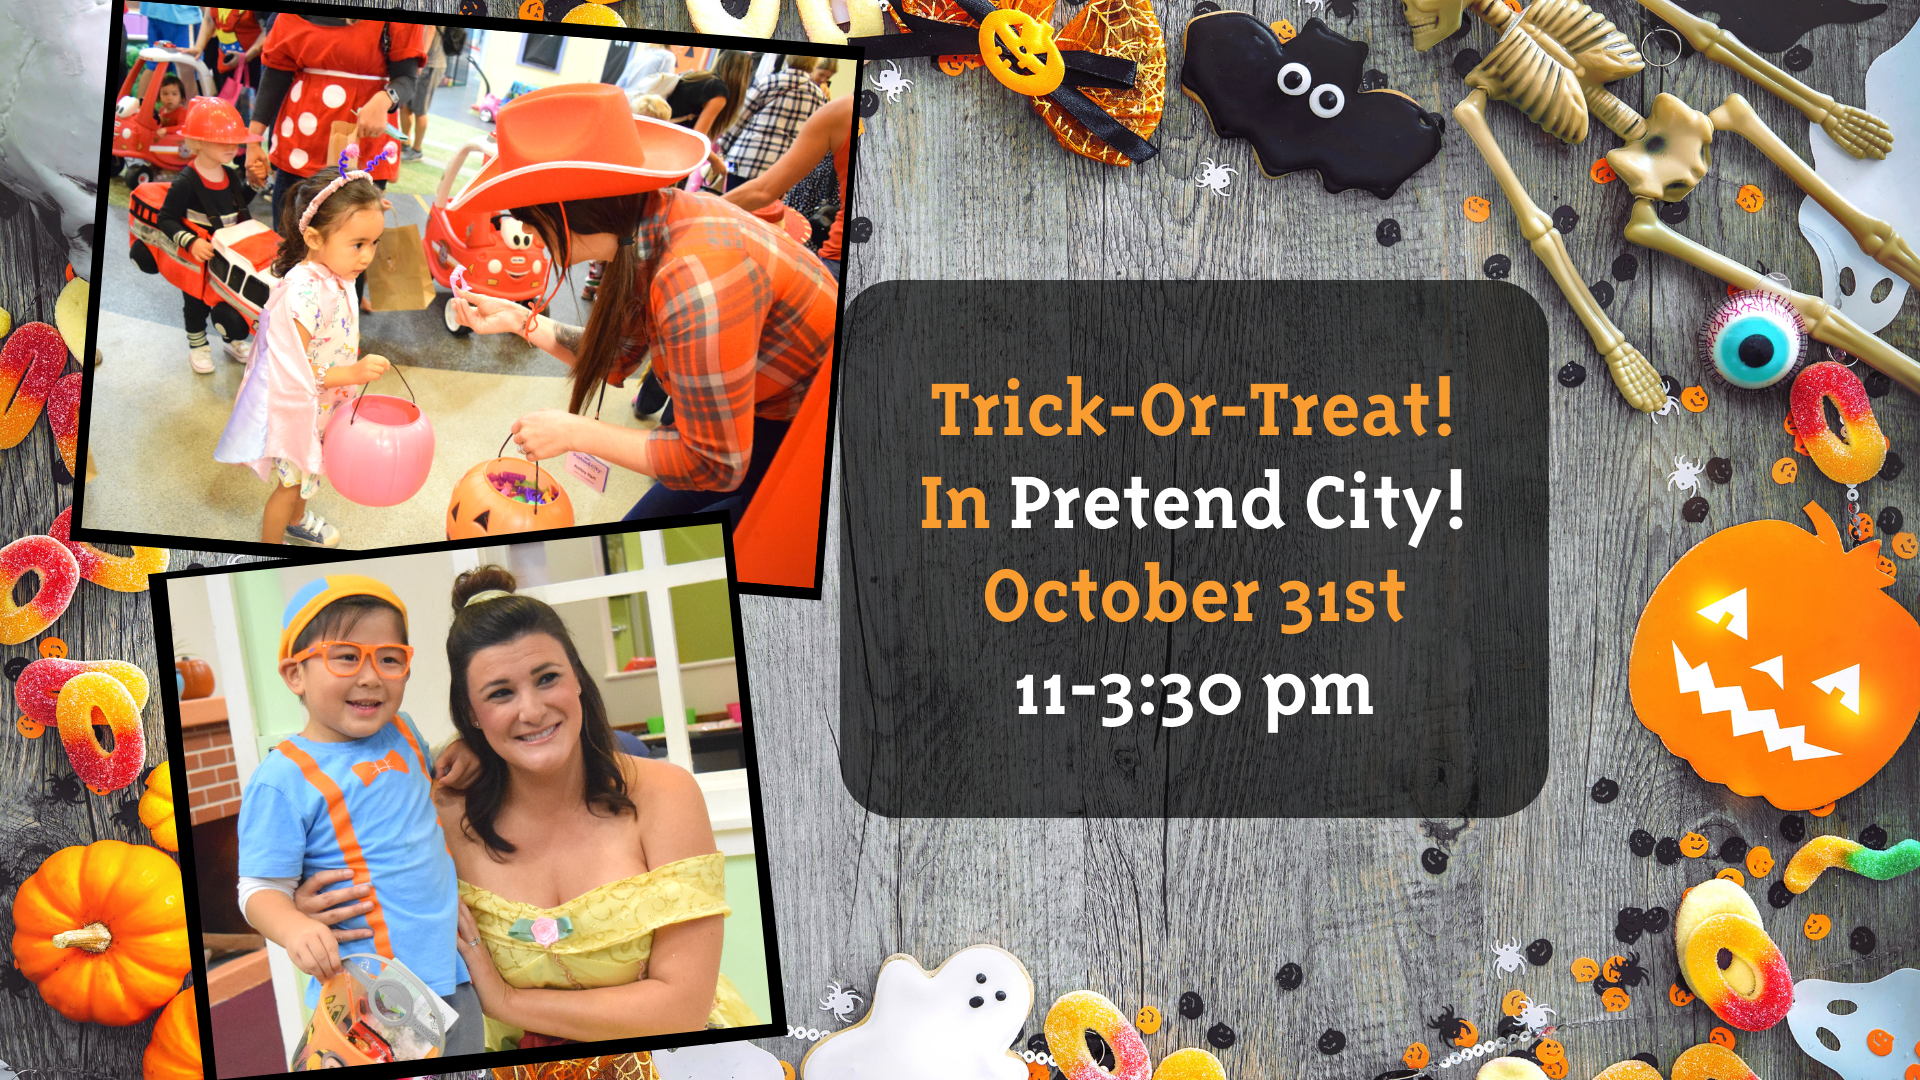 Pretend City is hosting a special Halloween event for Halloween 2020. Trick-or-Treat extravaganza will be fun for toddlers, children and families.